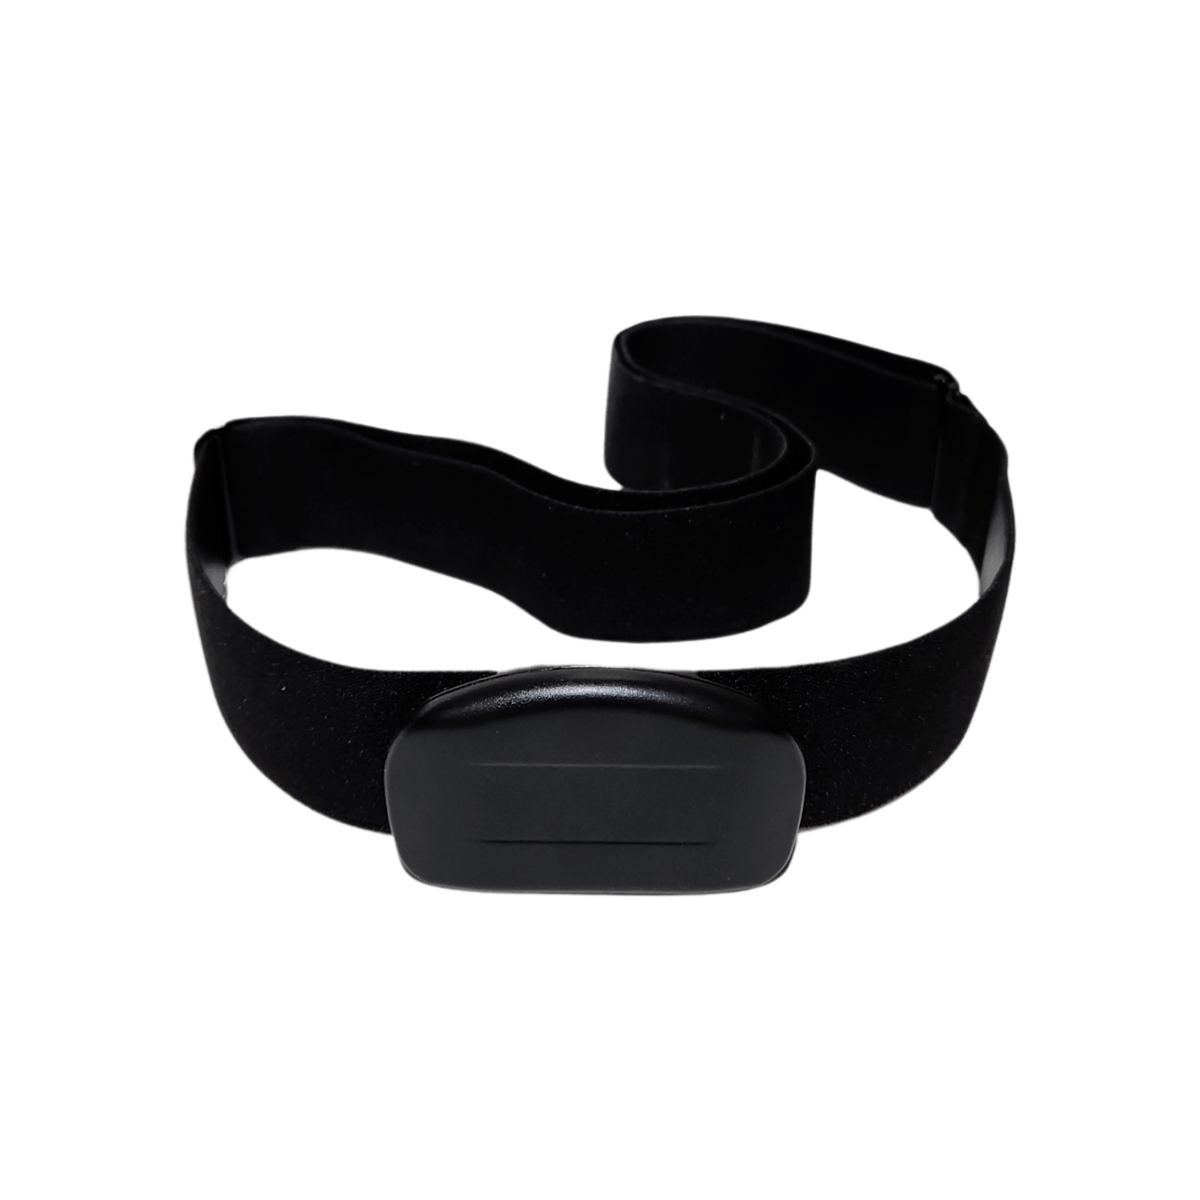 S2 Heart Rate Monitor Chest Strap